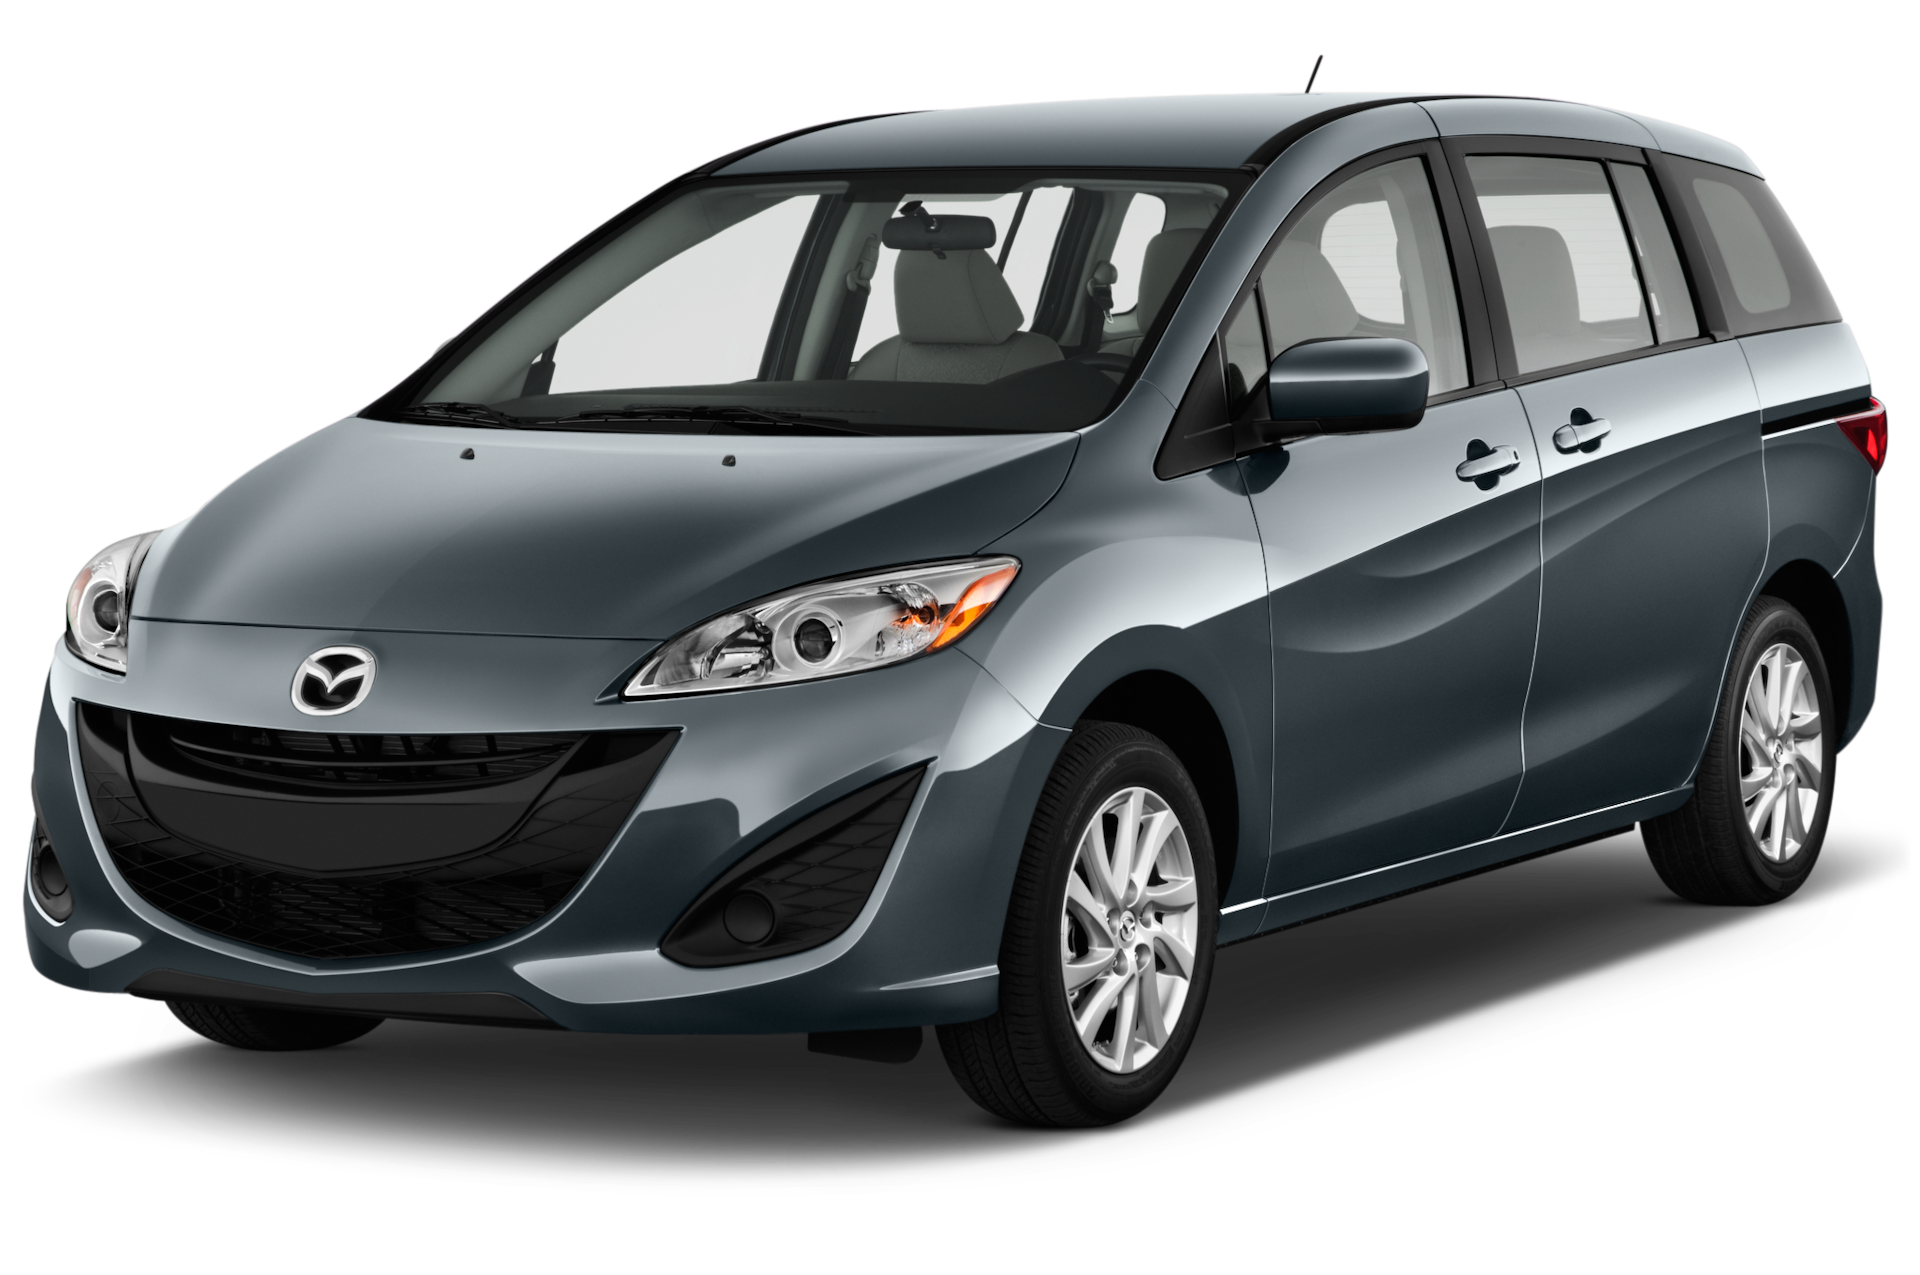 2013 Mazda Mazda5 Prices, Reviews, and Photos - MotorTrend